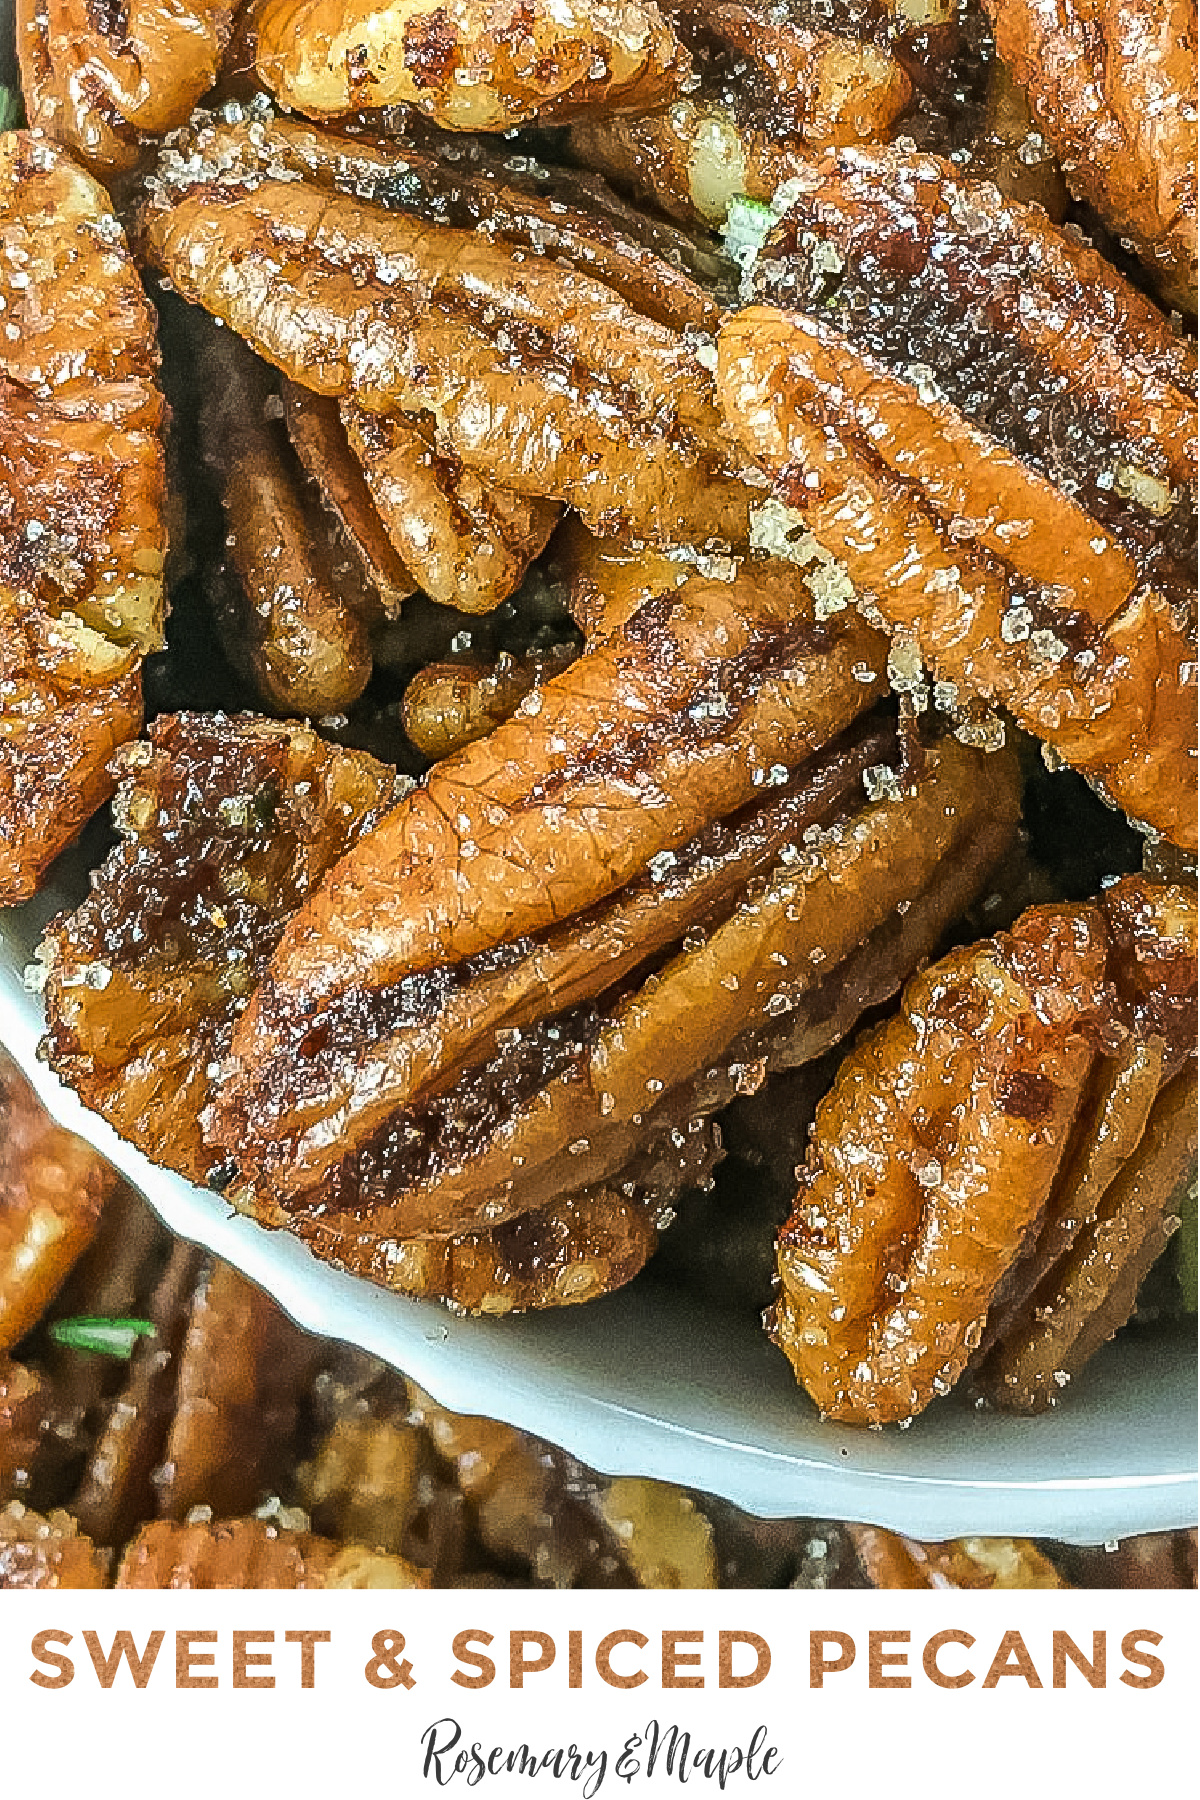 Make your own sweet and spicy roasted pecans at home to use in salads, desserts, and more! This easy recipe is a crowd pleaser.